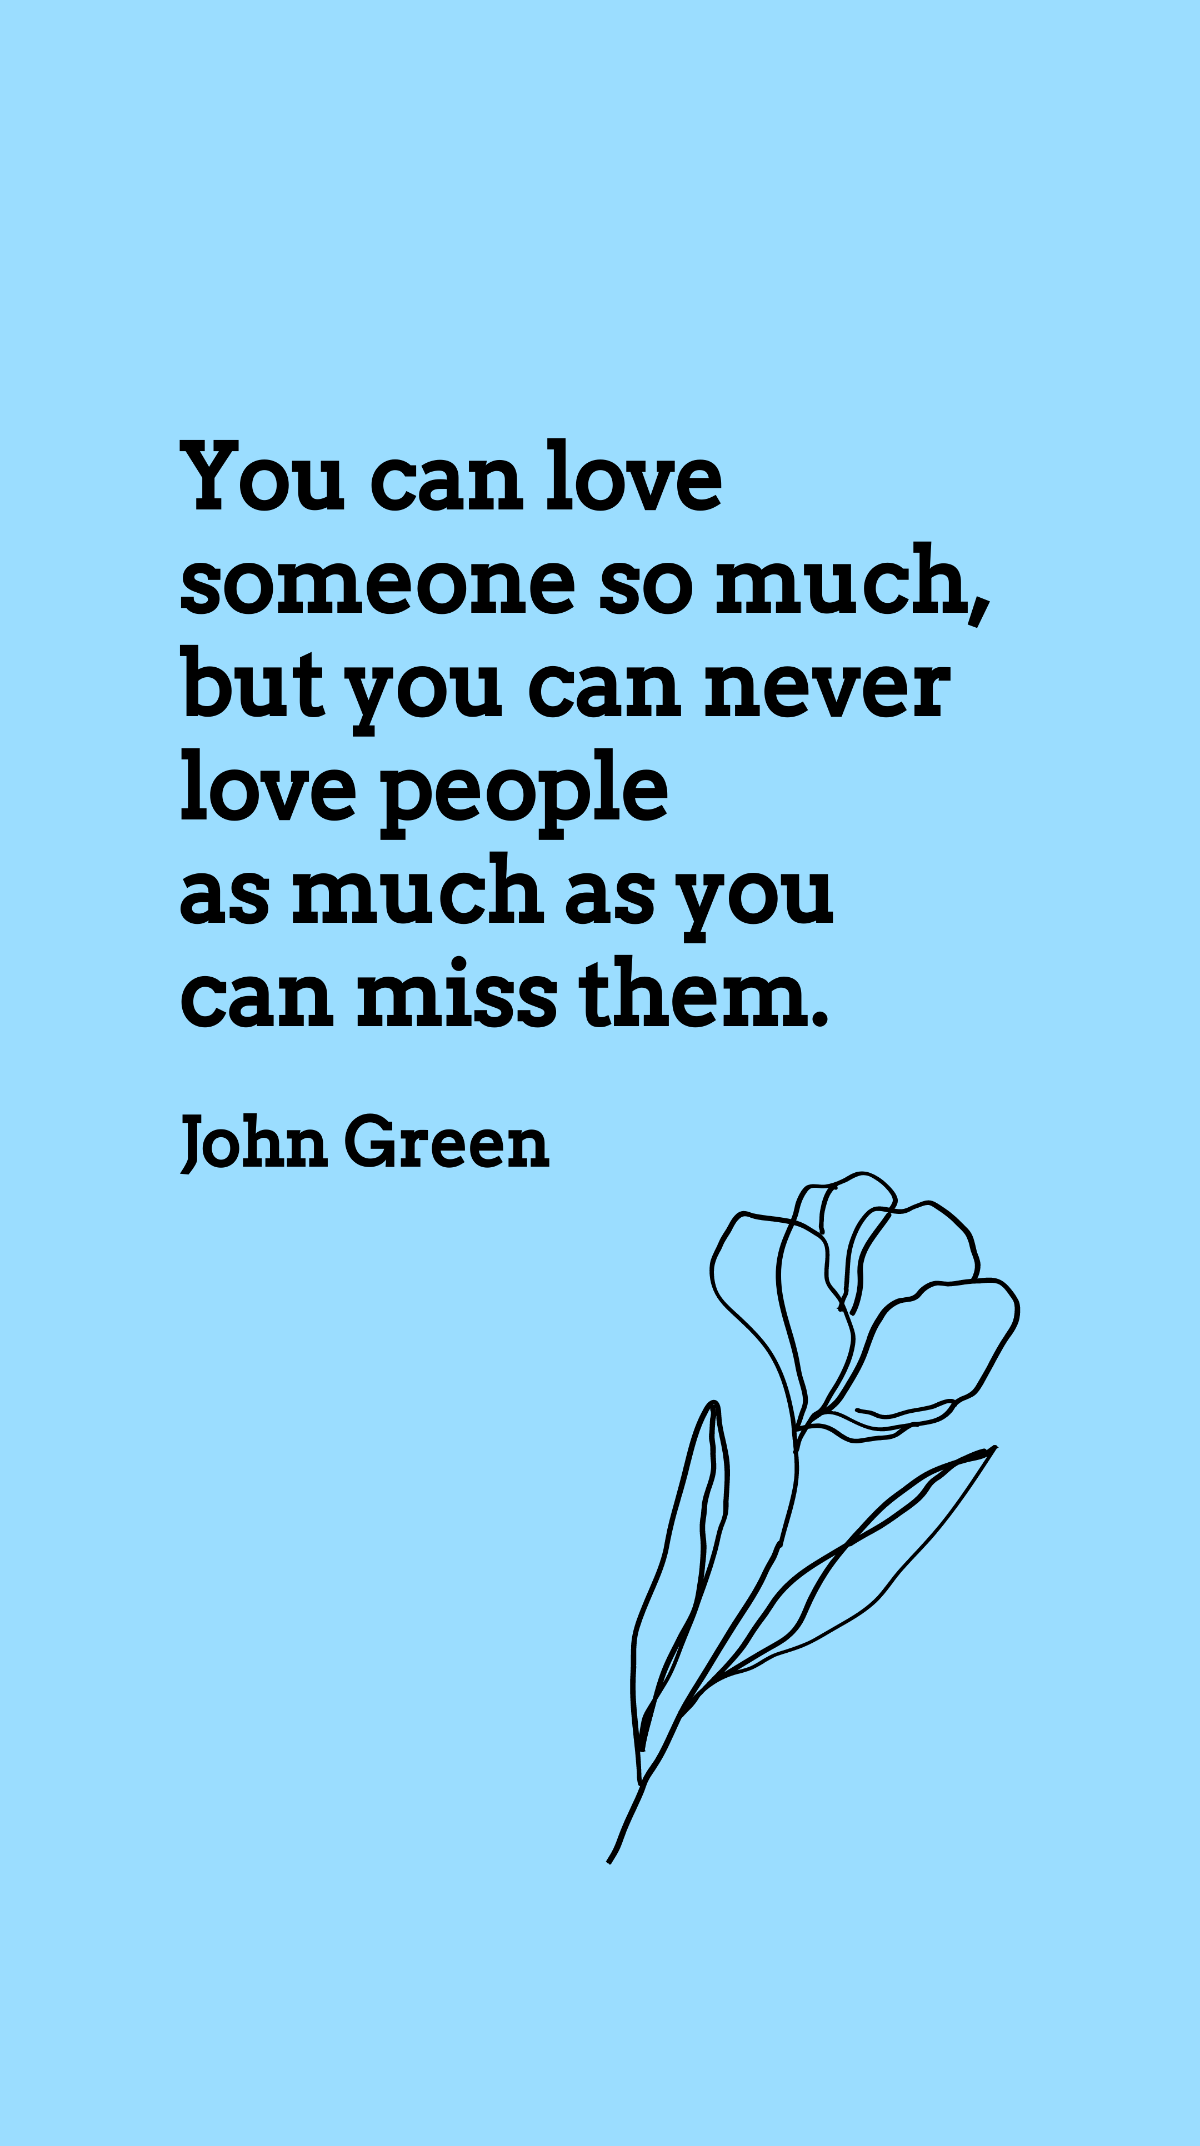 John Green - You can love someone so much, but you can never love people as much as you can miss them. Template